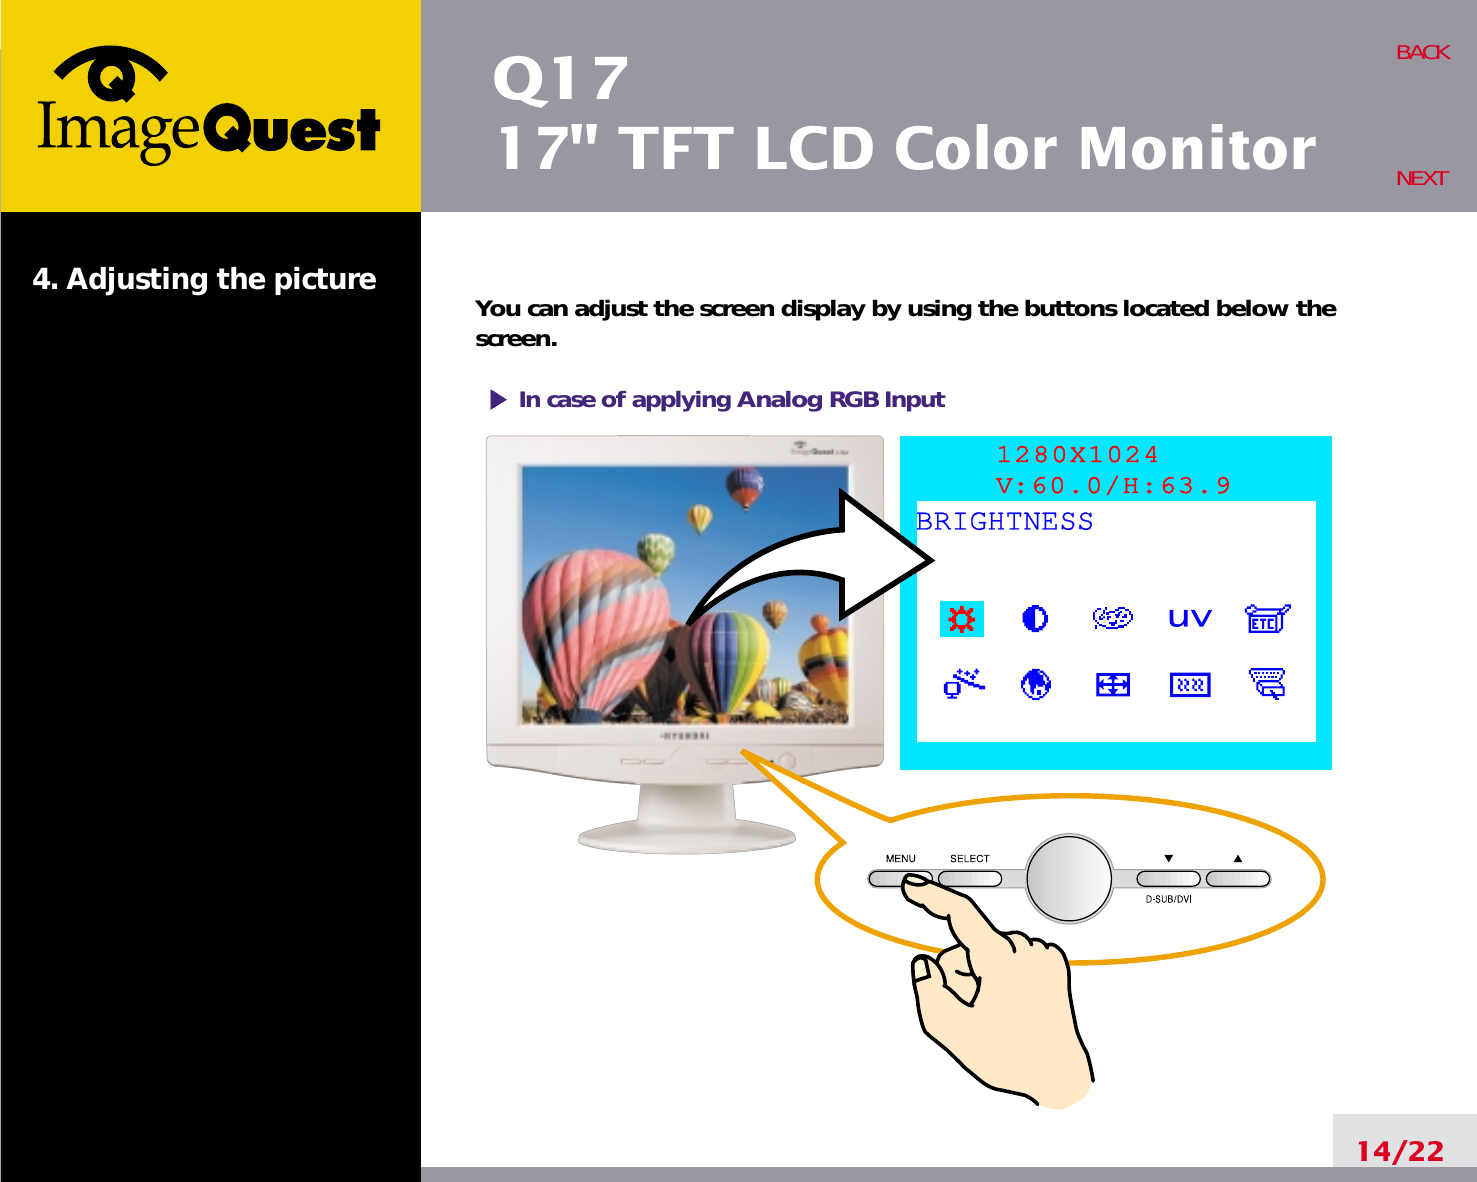 Q1717&quot; TFT LCD Color Monitor4. Adjusting the picture14/22BACKNEXTYou can adjust the screen display by using the buttons located below thescreen.1280X1024V:60.0/H:63.9BRIGHTNESSIn case of applying Analog RGBInput